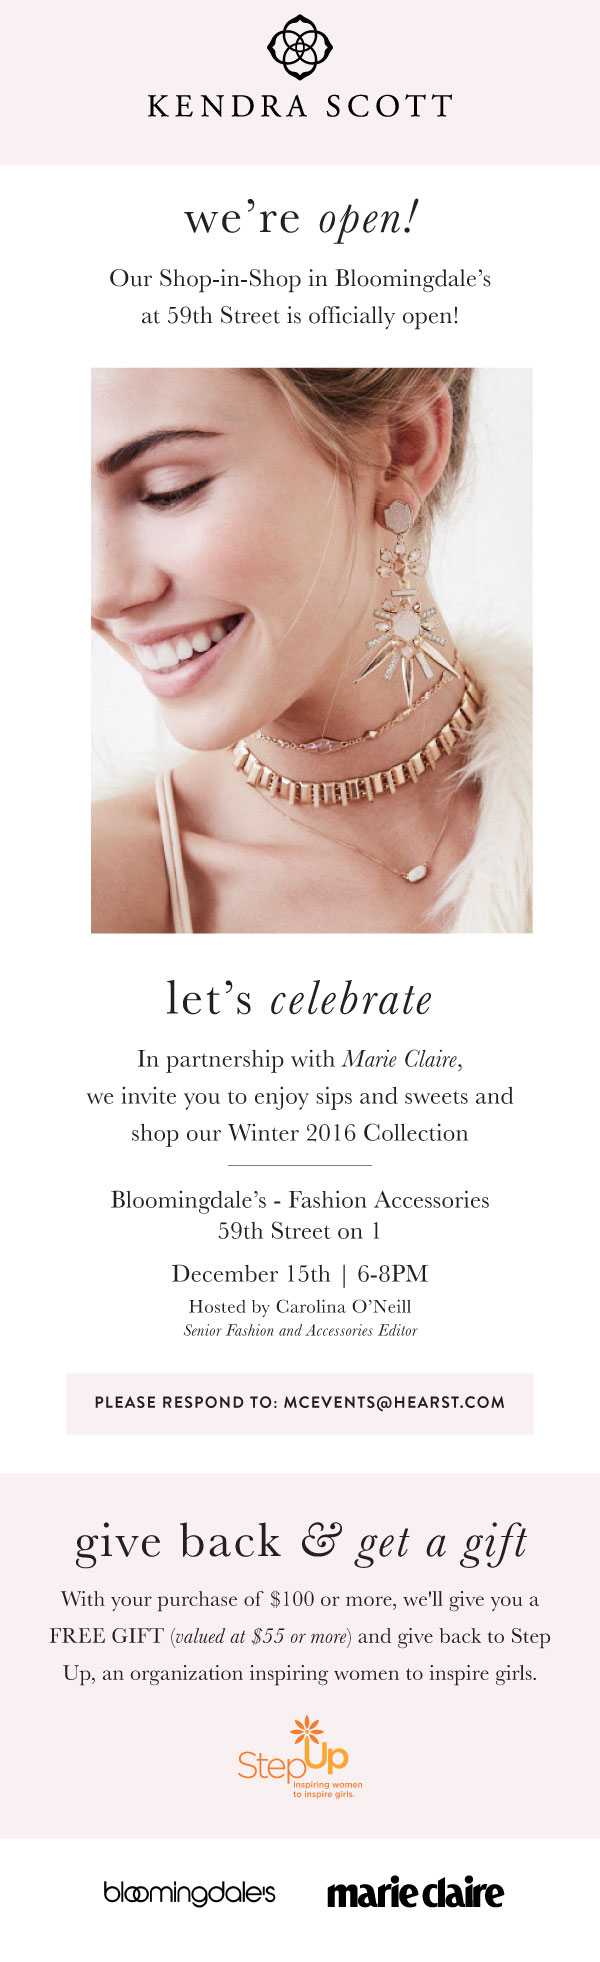 Step Up Salon: an evening with Kendra Scott at Bloomingdale's